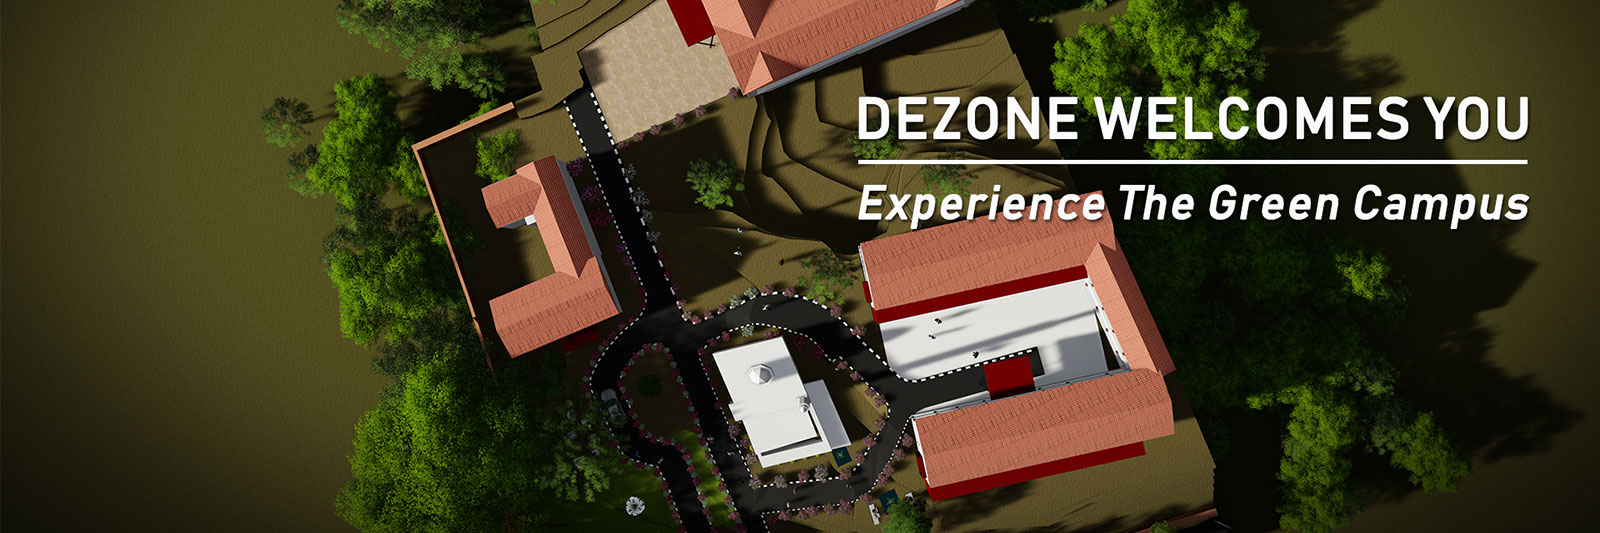 Dezone welcomes you